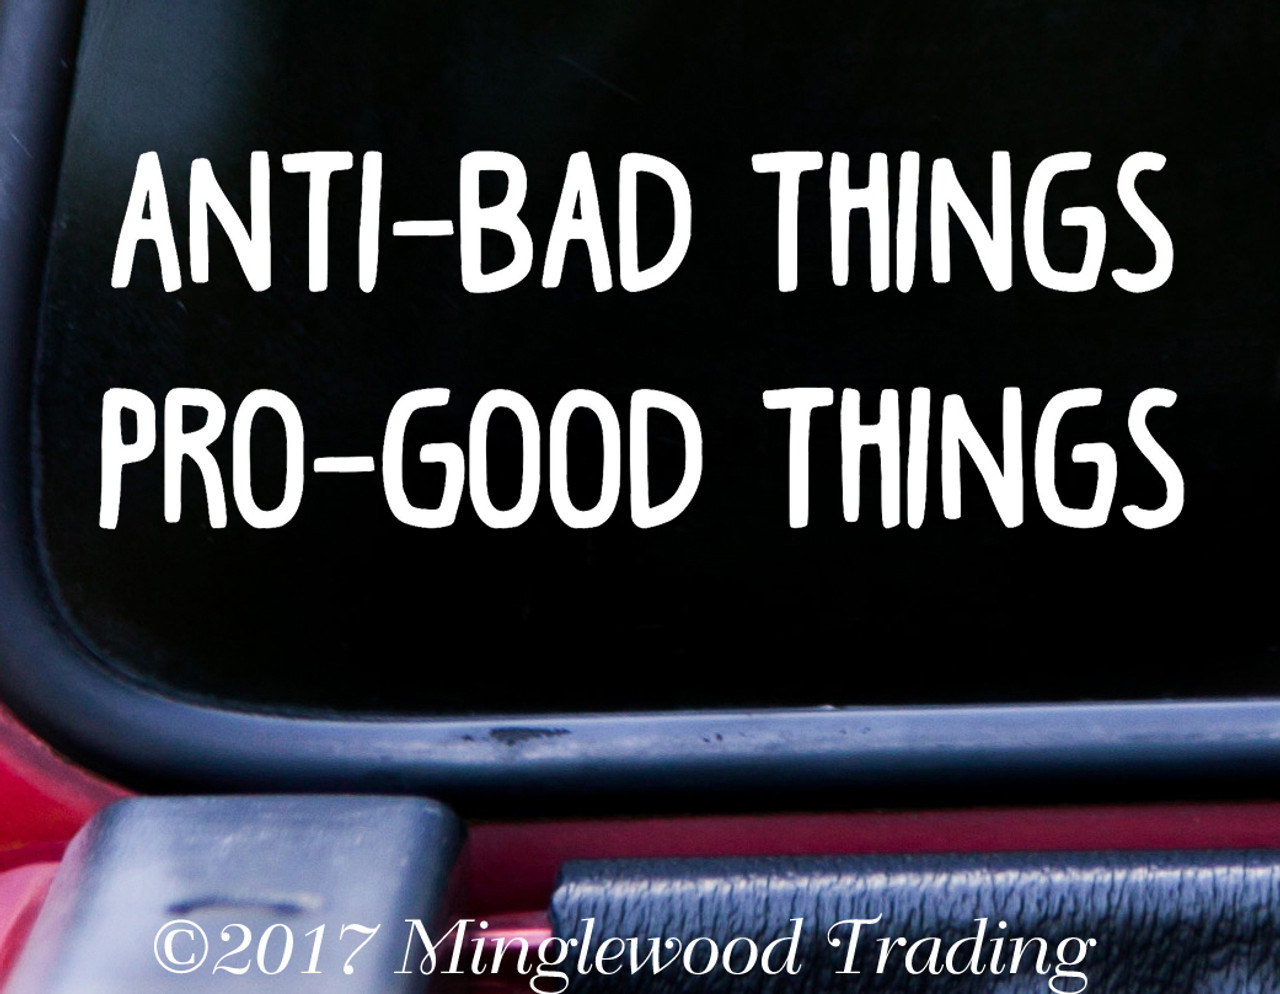 Anti-Bad Things Pro-Good Things 5.5" x 2" Vinyl Decal Sticker - Stay Positive - 20 Color Options